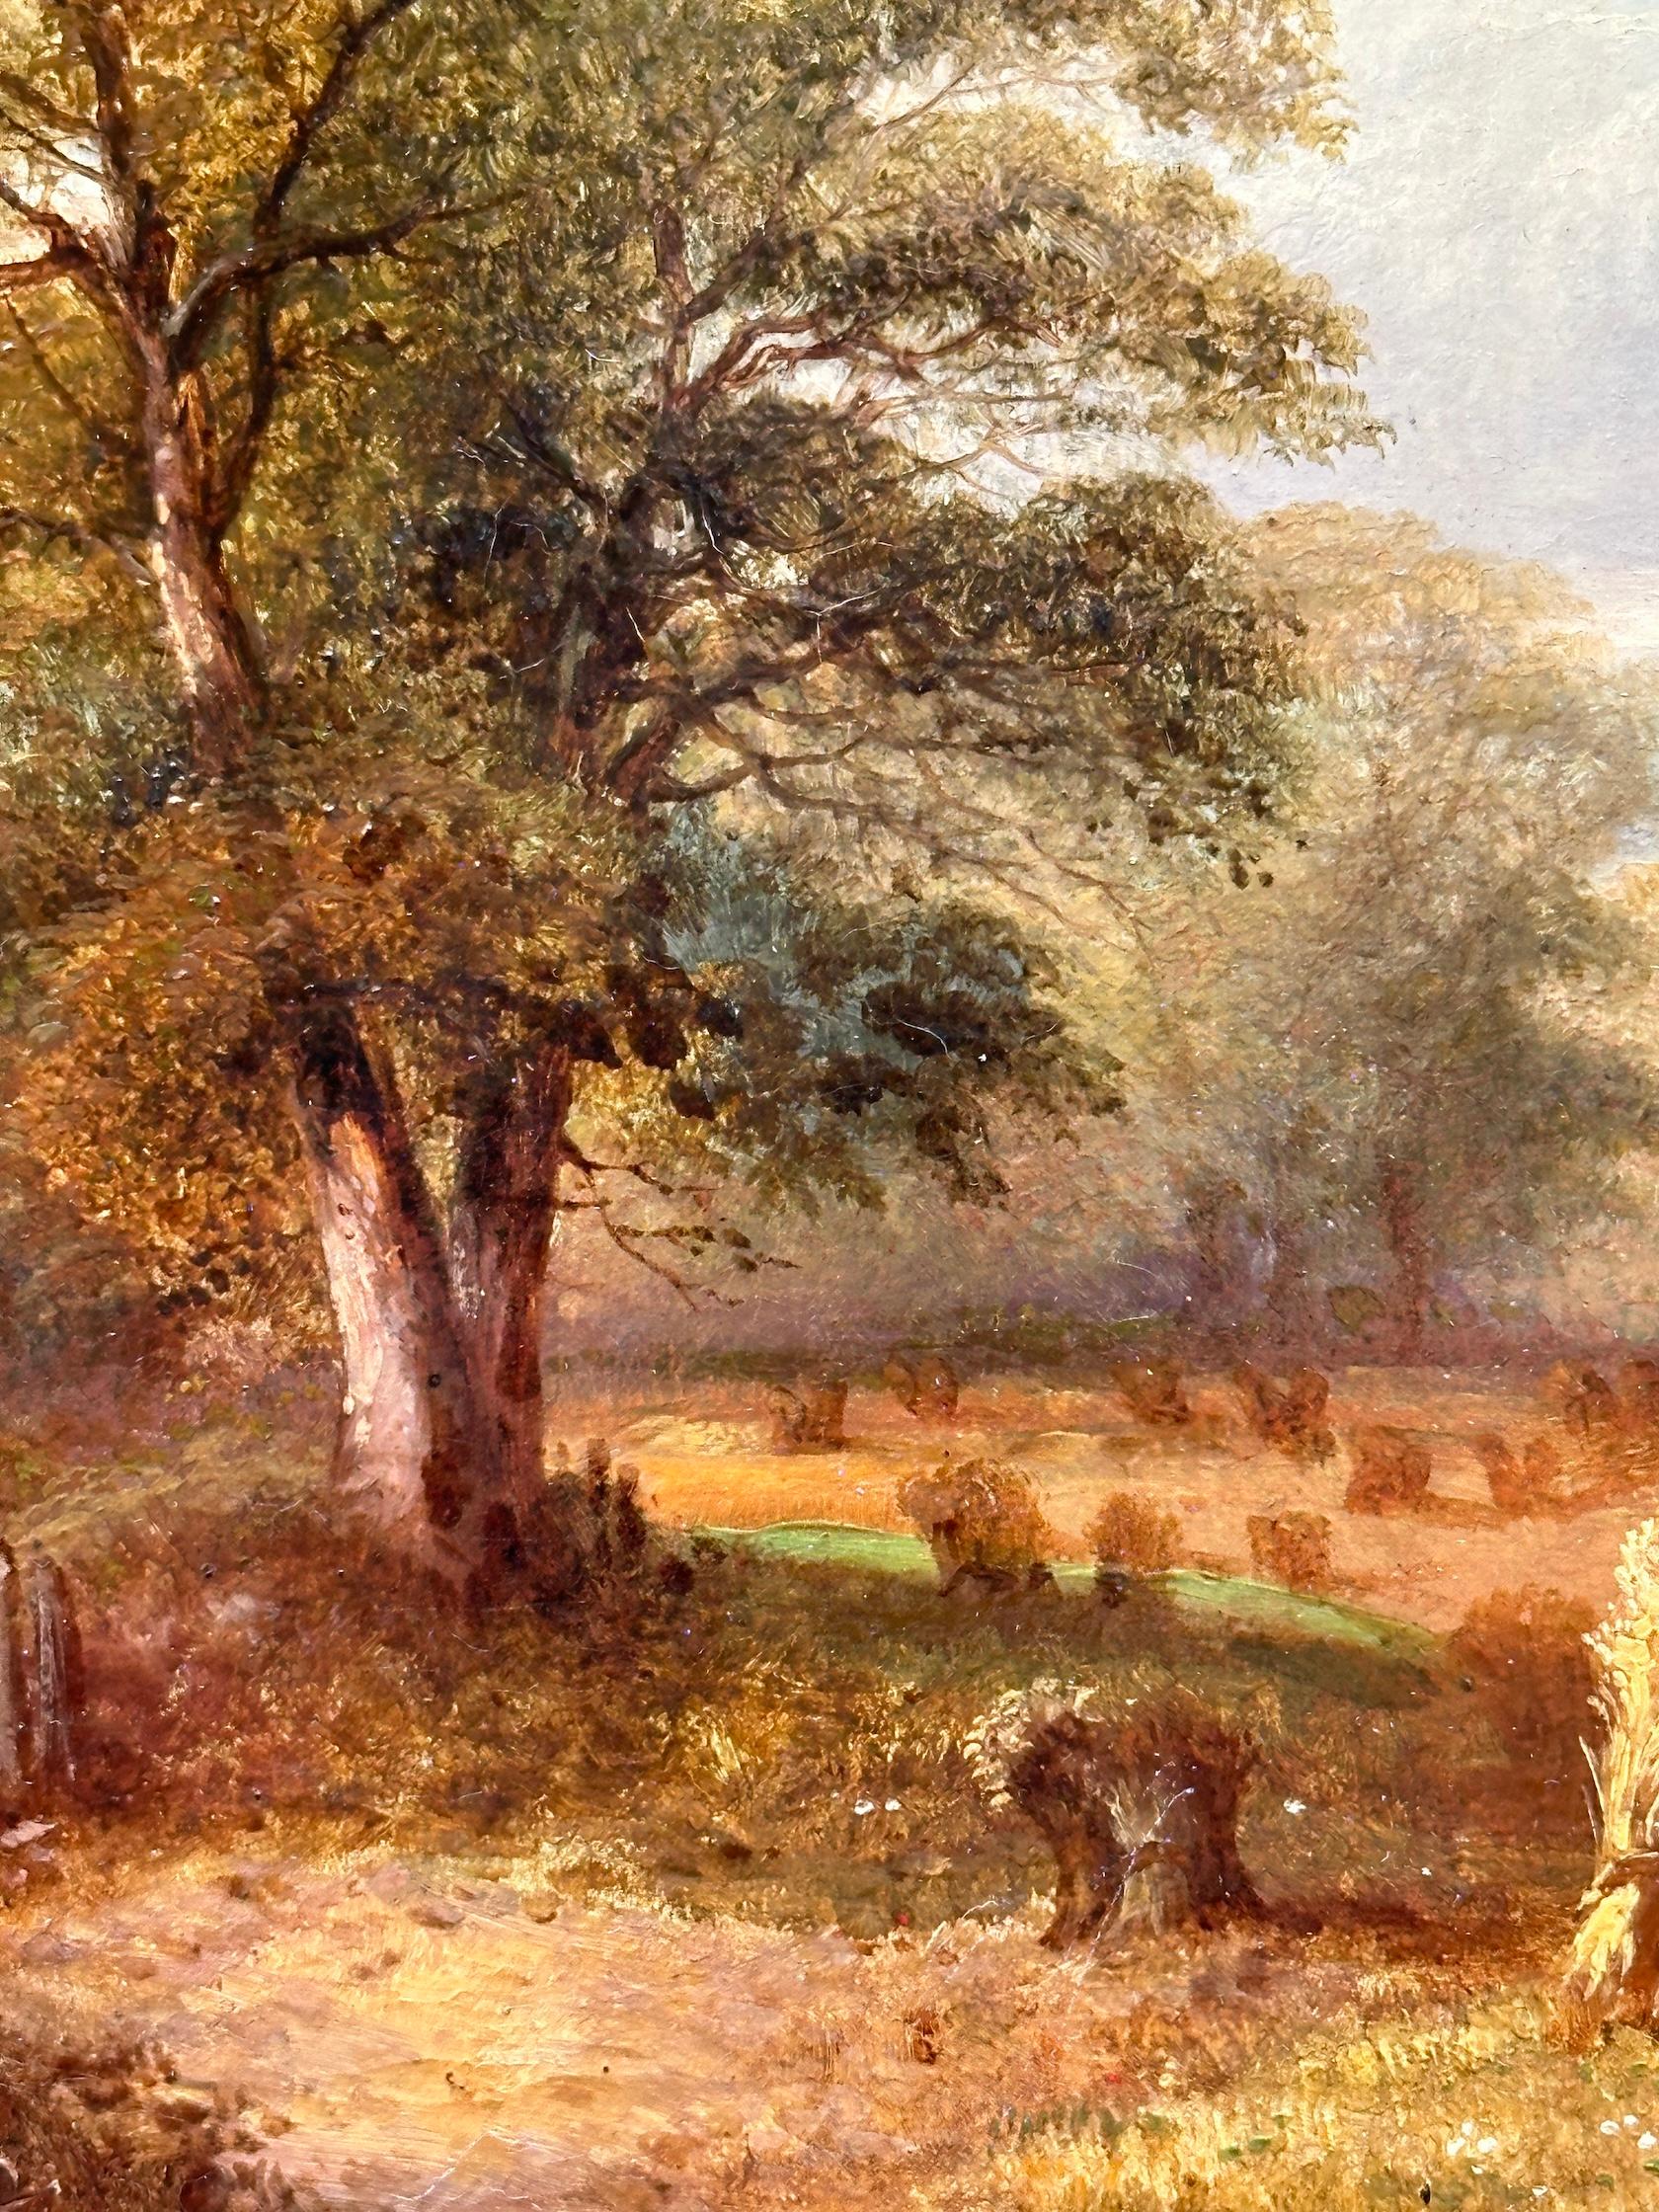 19th century English landscape with trees, a Harvest Field during Summertime - Victorian Painting by C. Brown